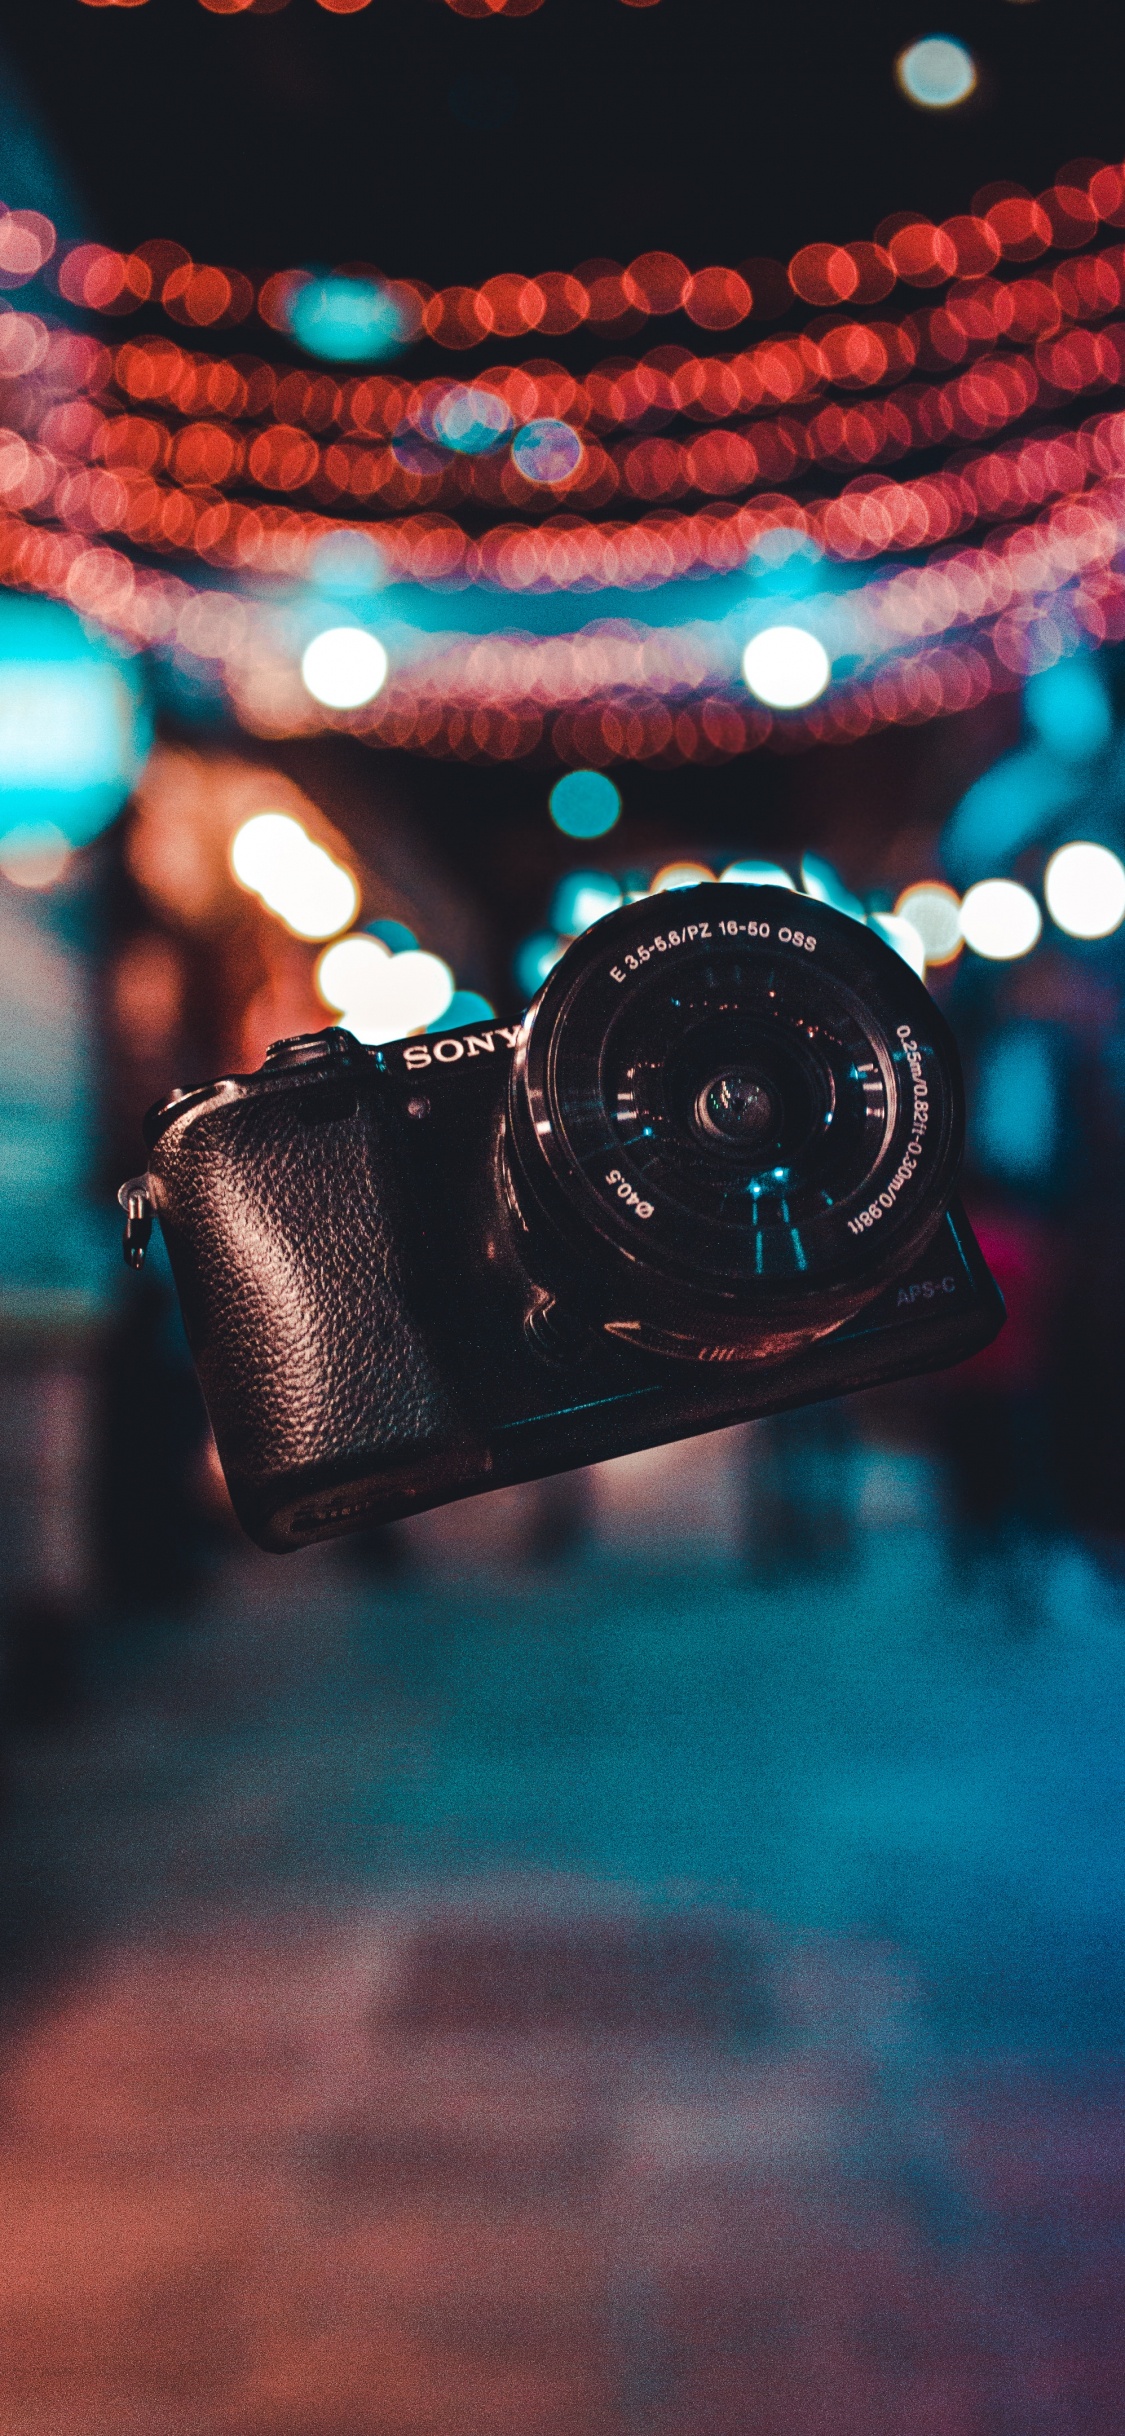 Black Dslr Camera on Blue and White String Lights. Wallpaper in 1125x2436 Resolution